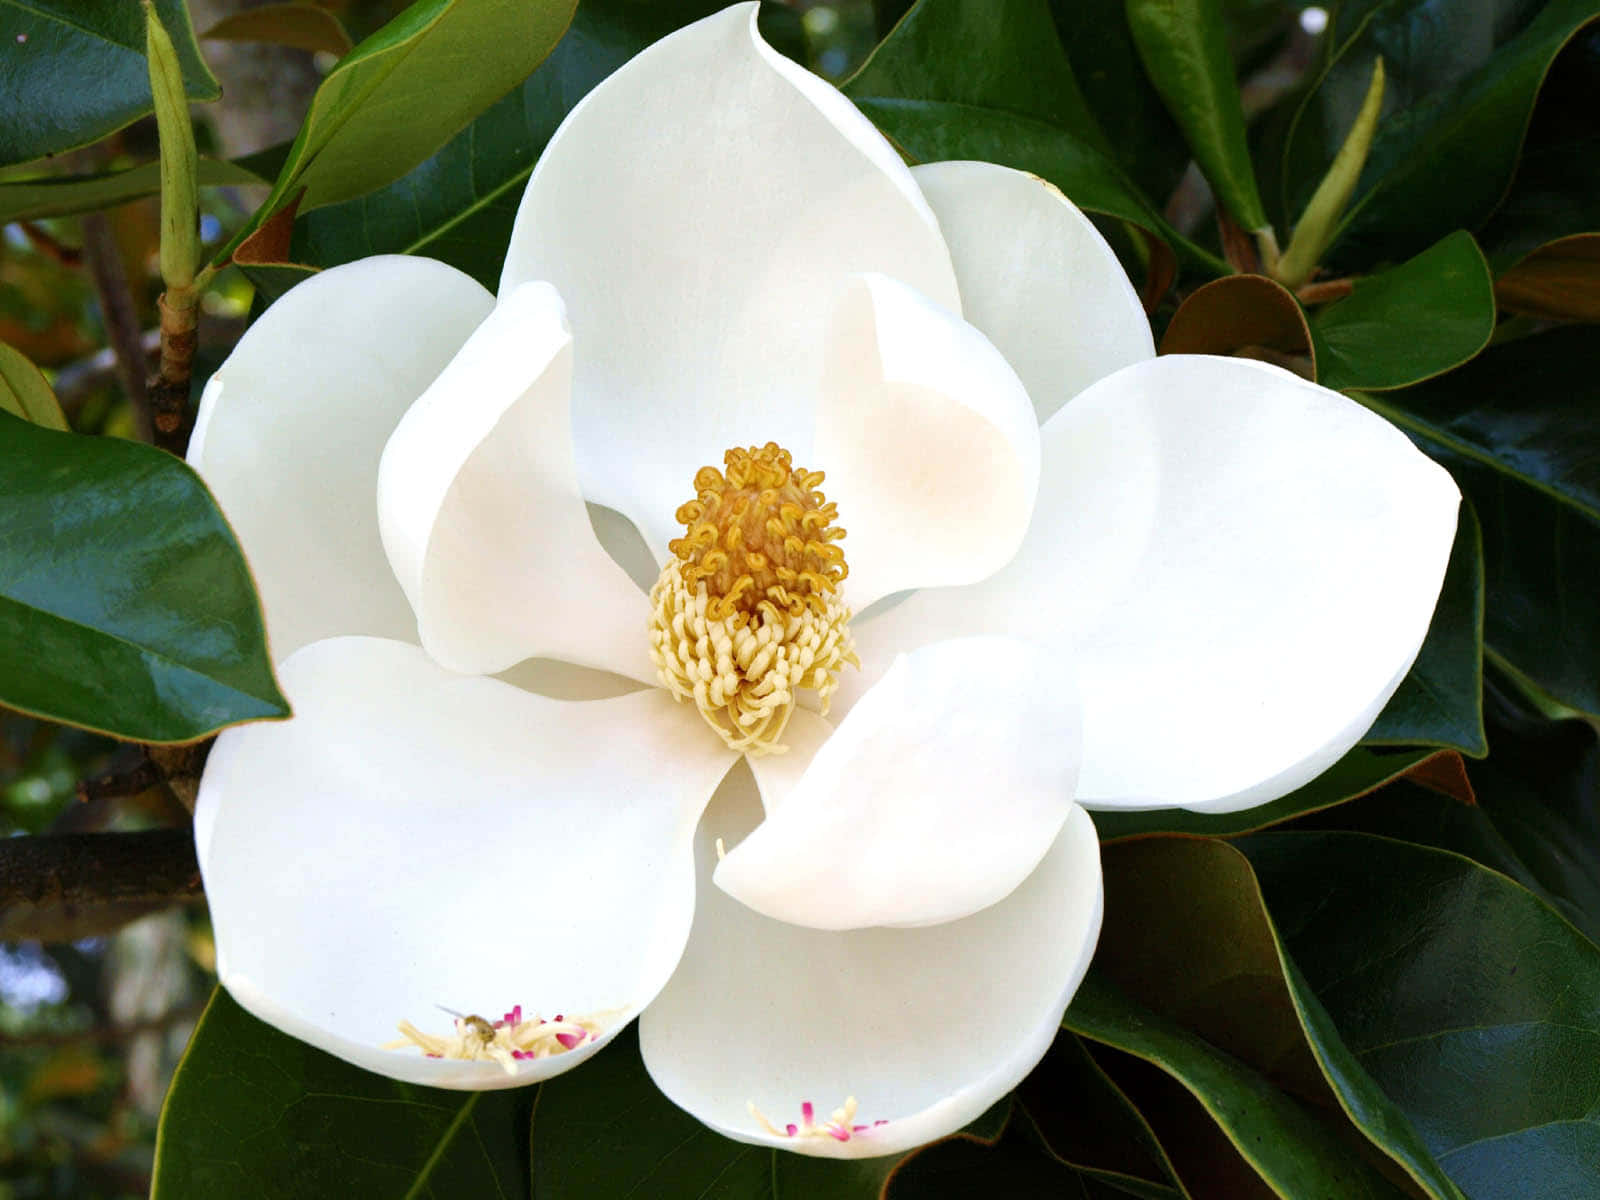 Magnolia blossoms symbolizing resilience and beauty